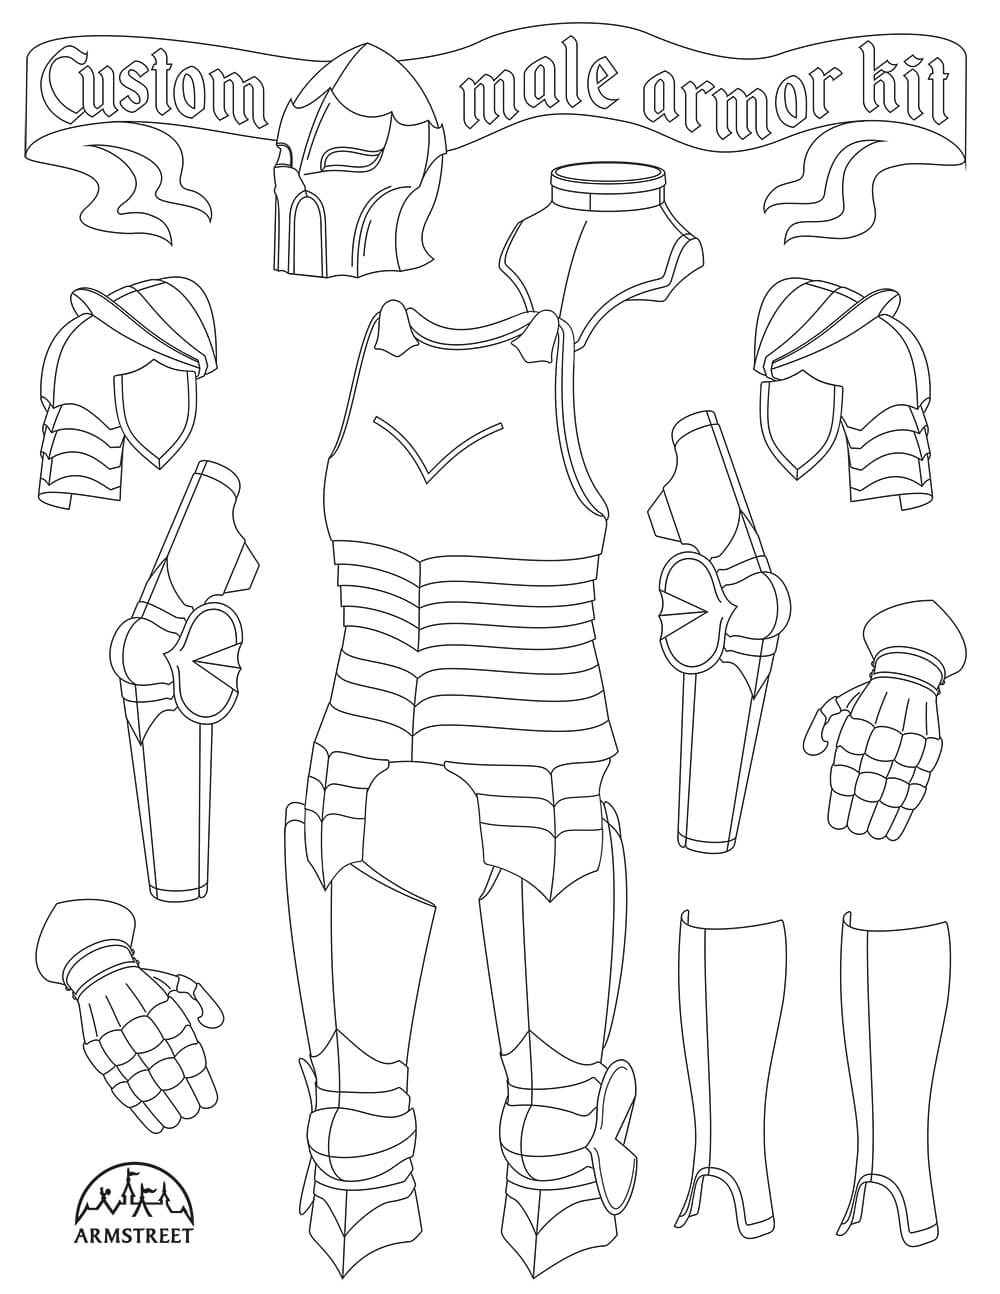 Full male armour template